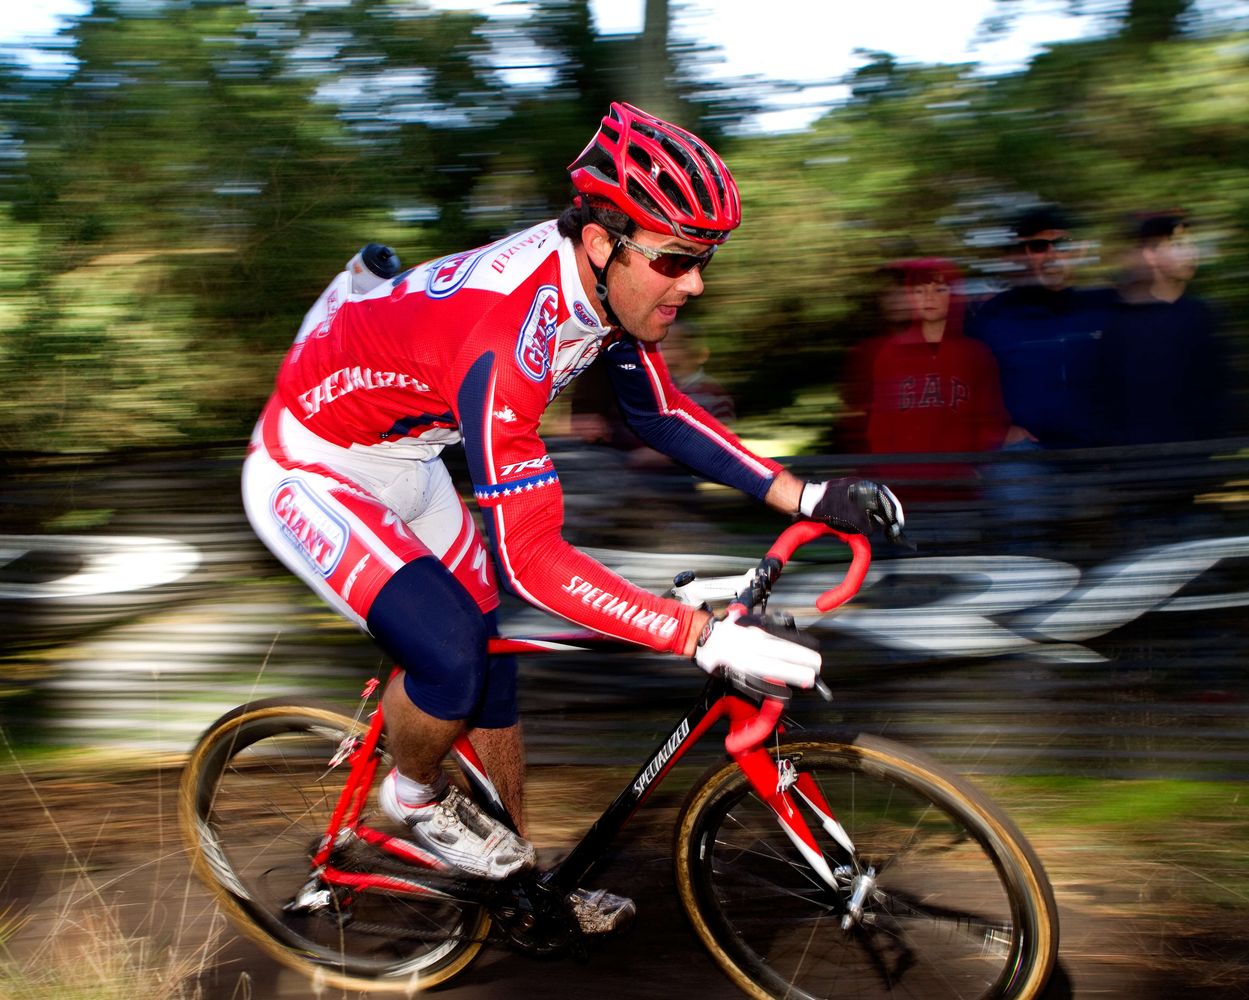 Justin Robinson is always a contender at Golden Gate Park and finished second. © Tim Westmore